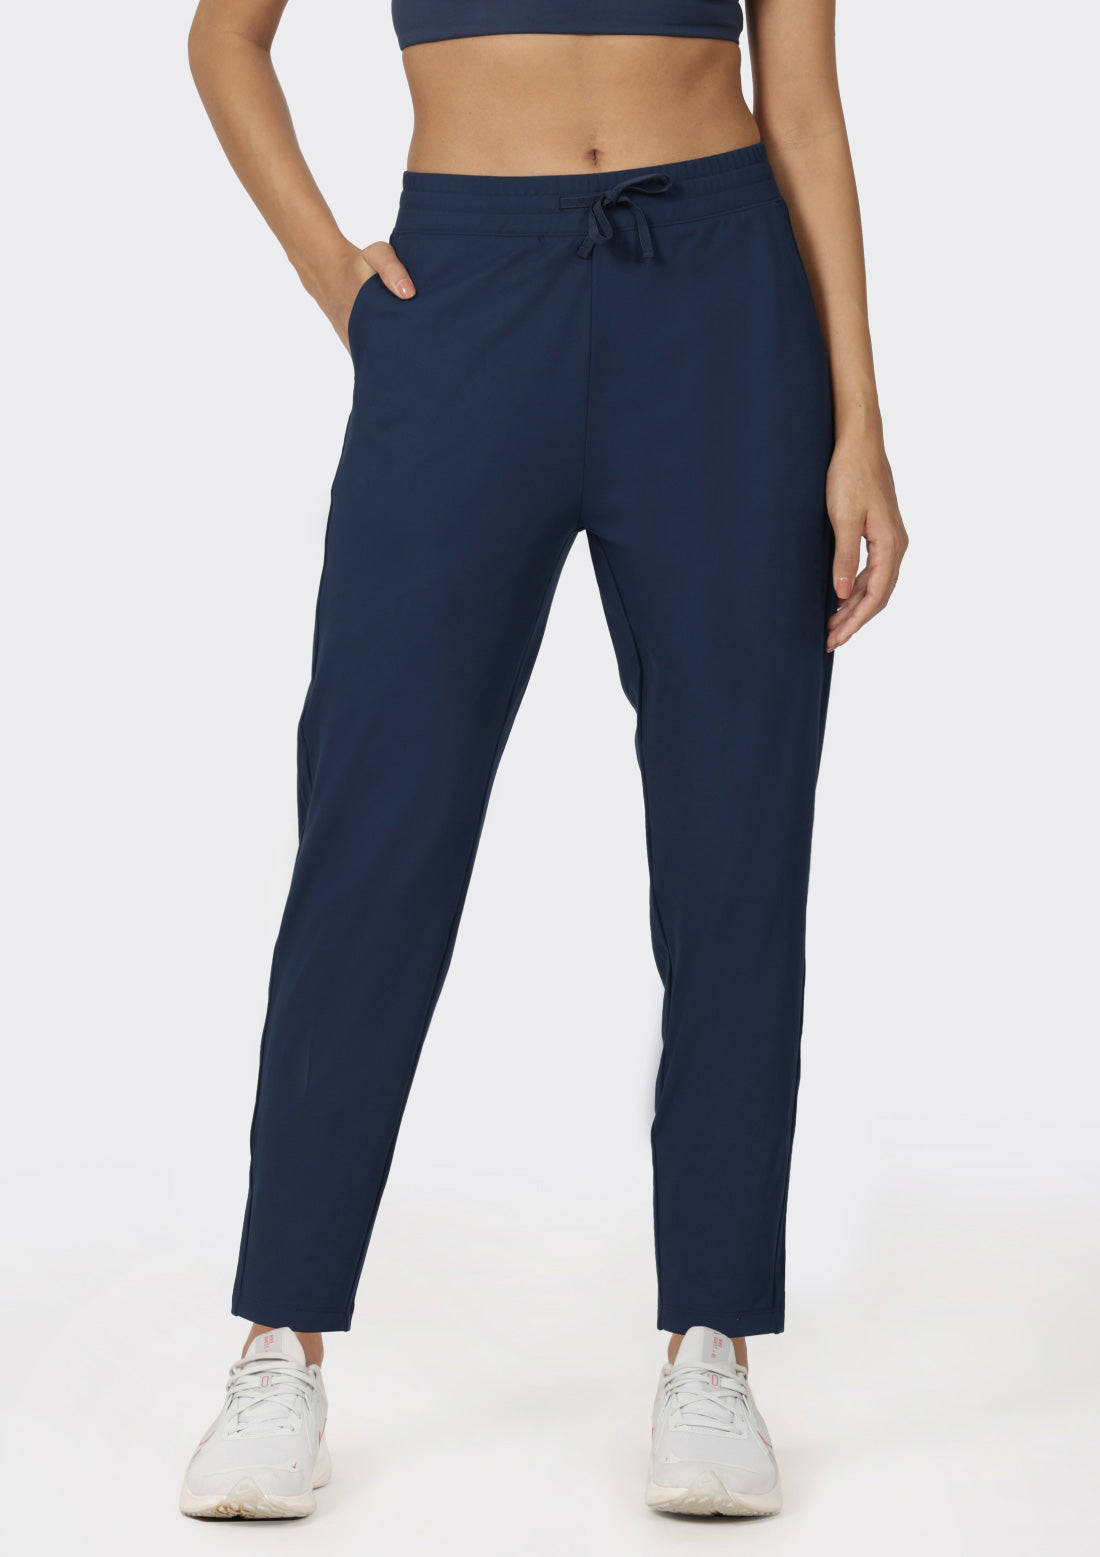 Mid-Waist Tapered Pants with Adjustable Drawstring and 2 Side Pockets